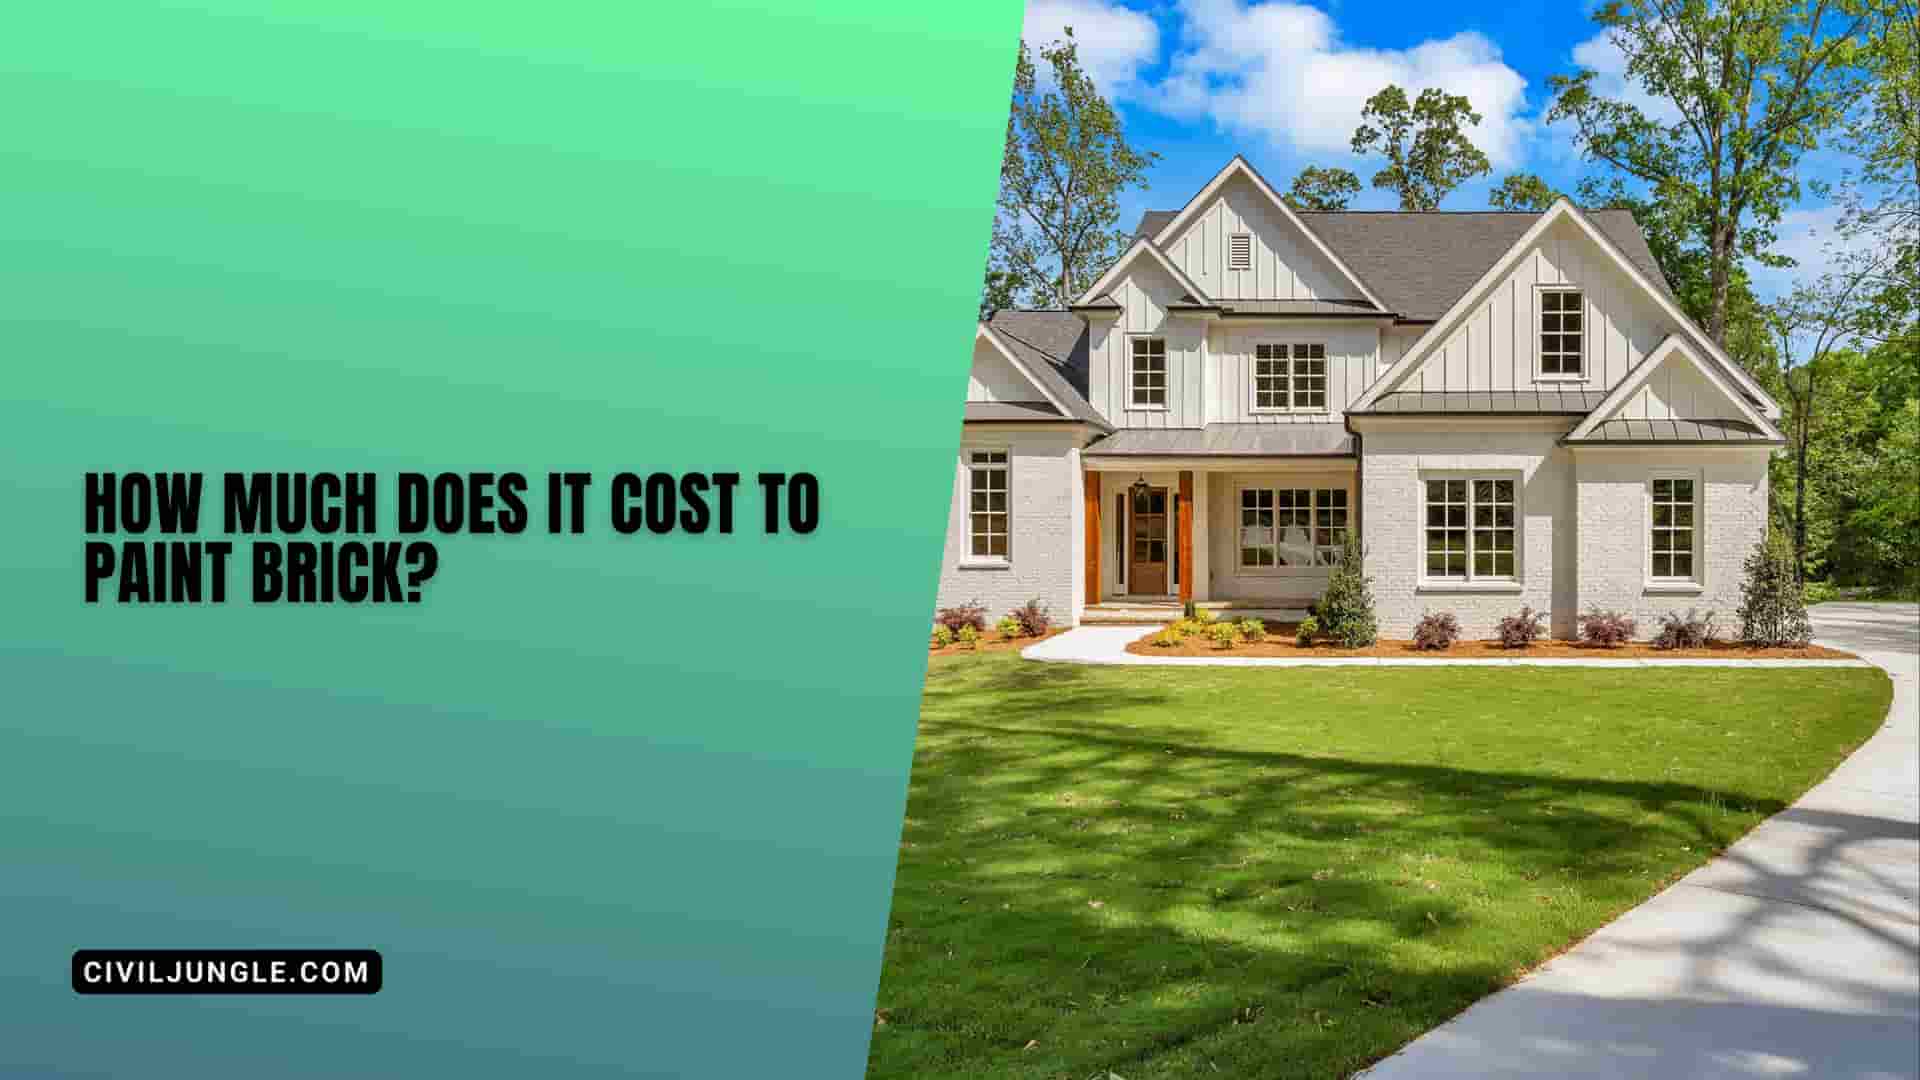 How Much Does It Cost to Paint Brick?